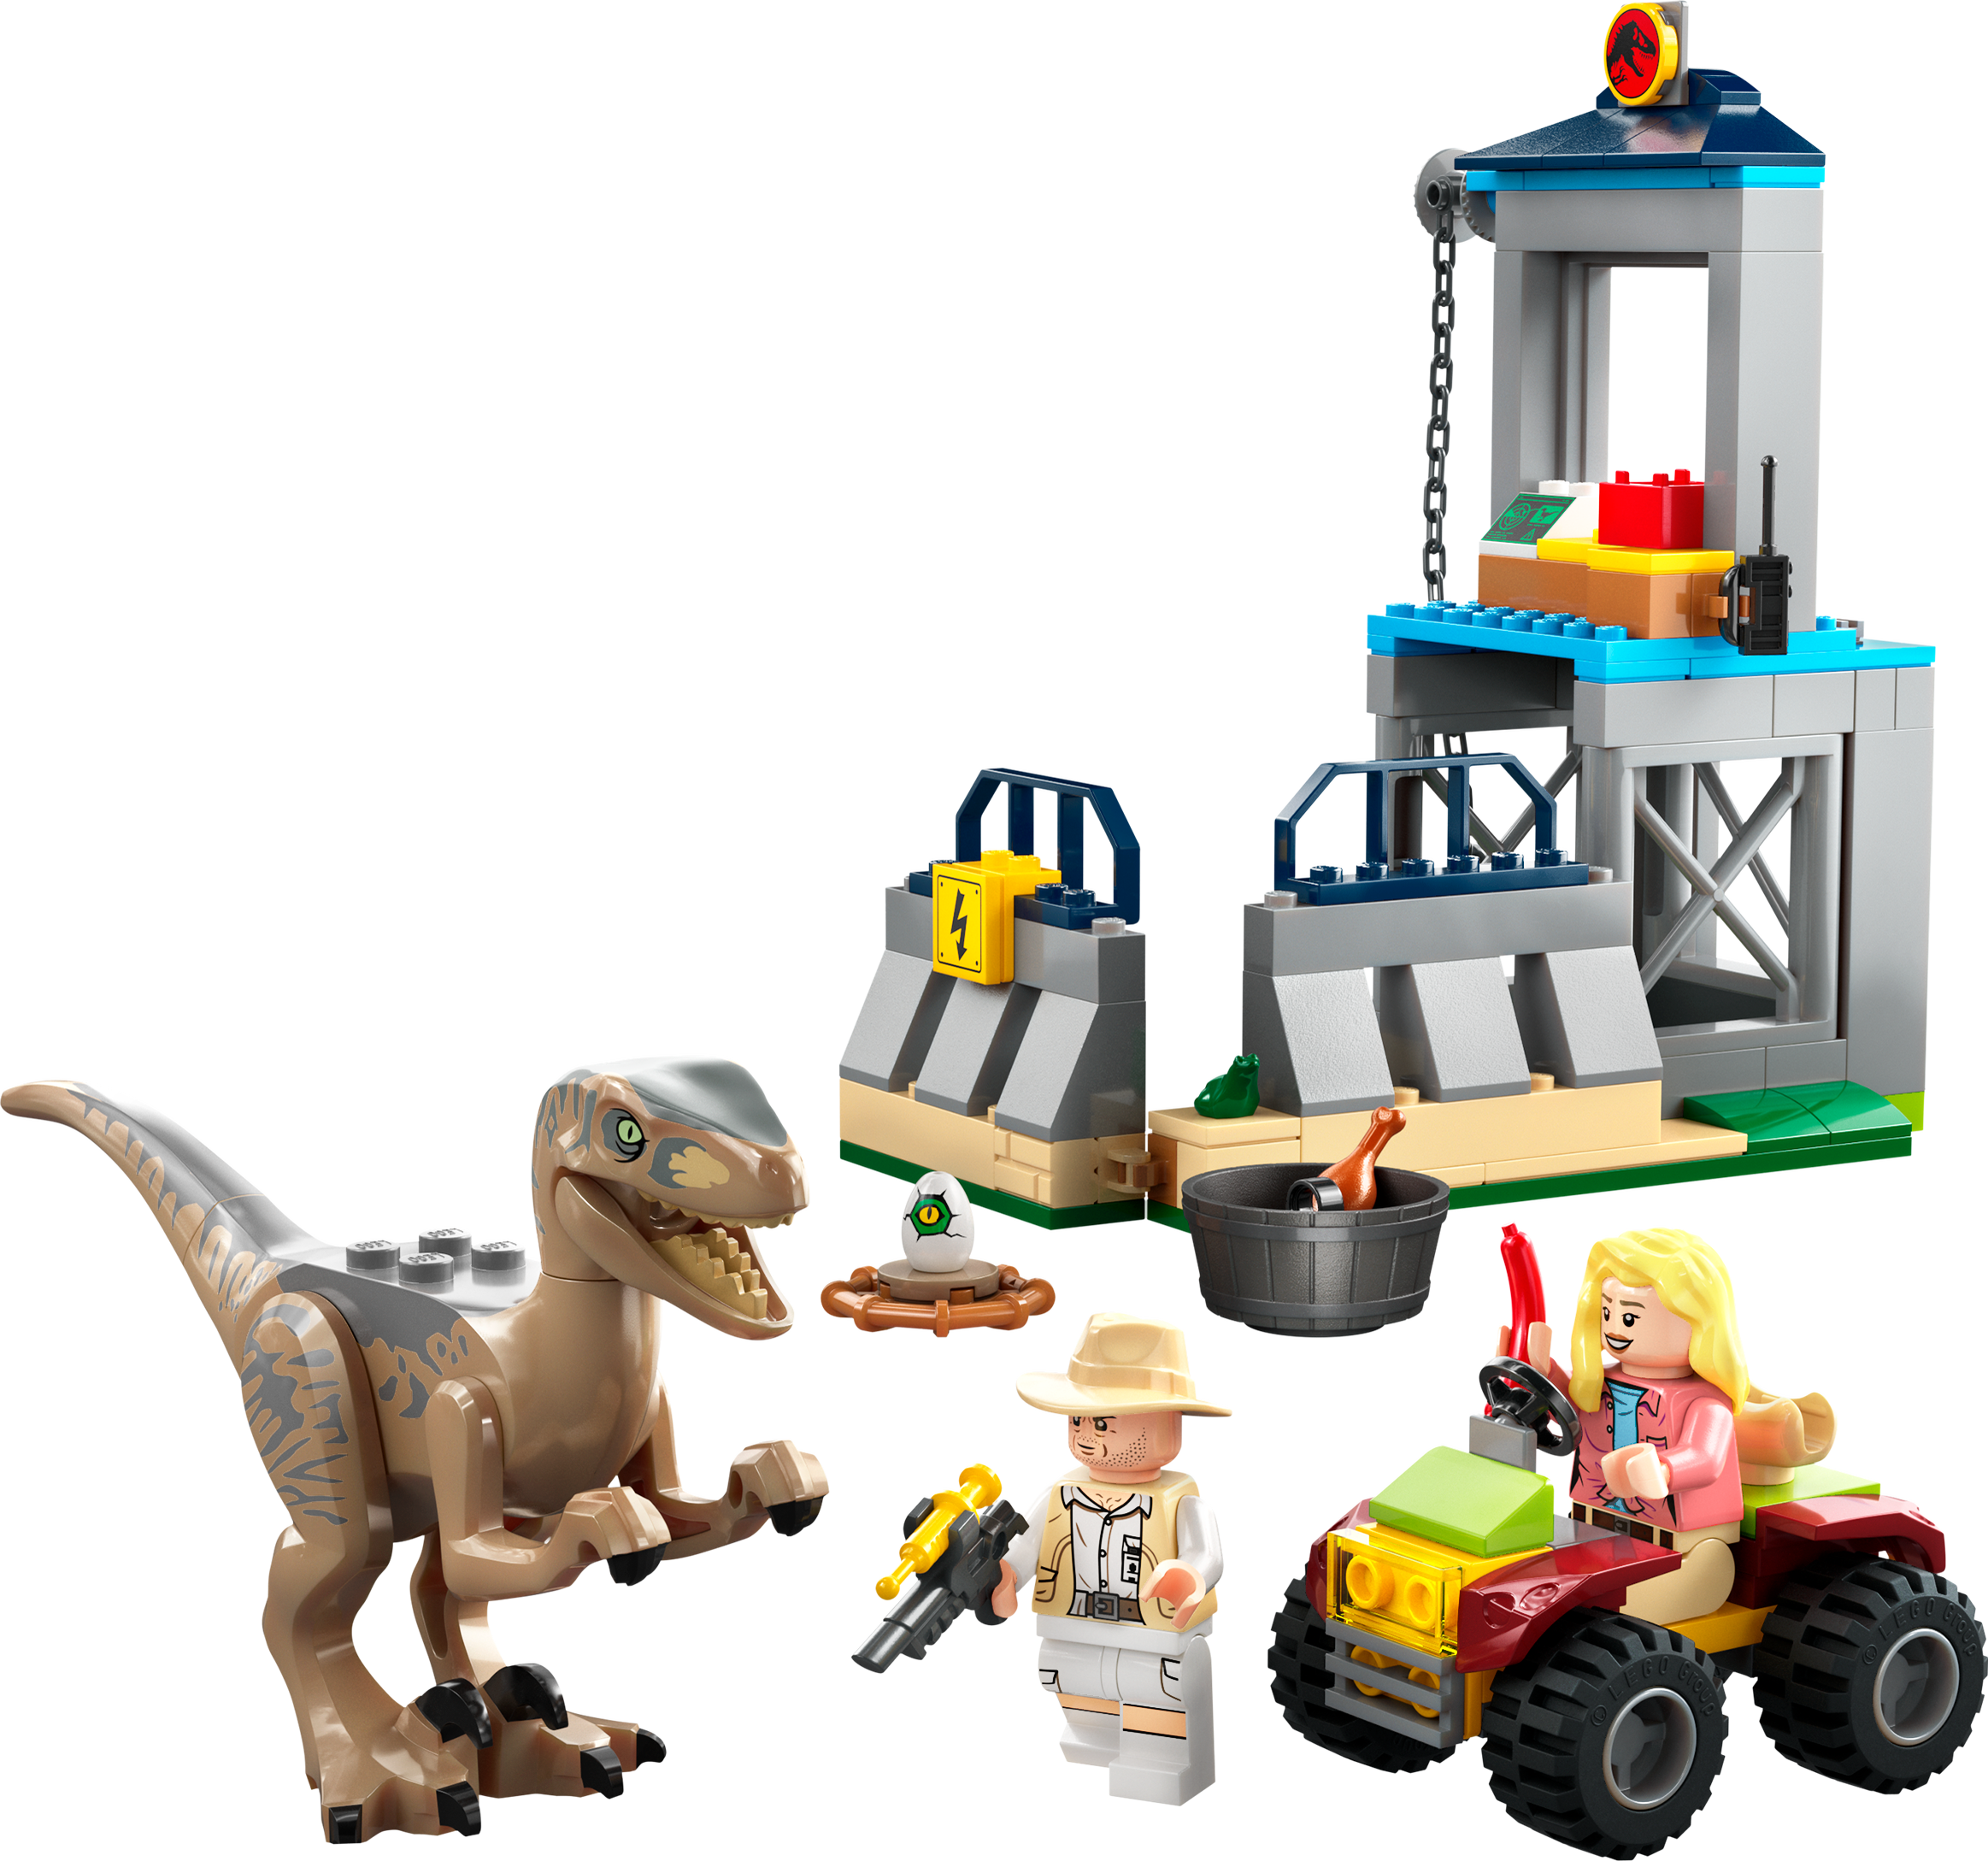 New Lego Jurassic Park Set Contains Giant Pile Of Shit